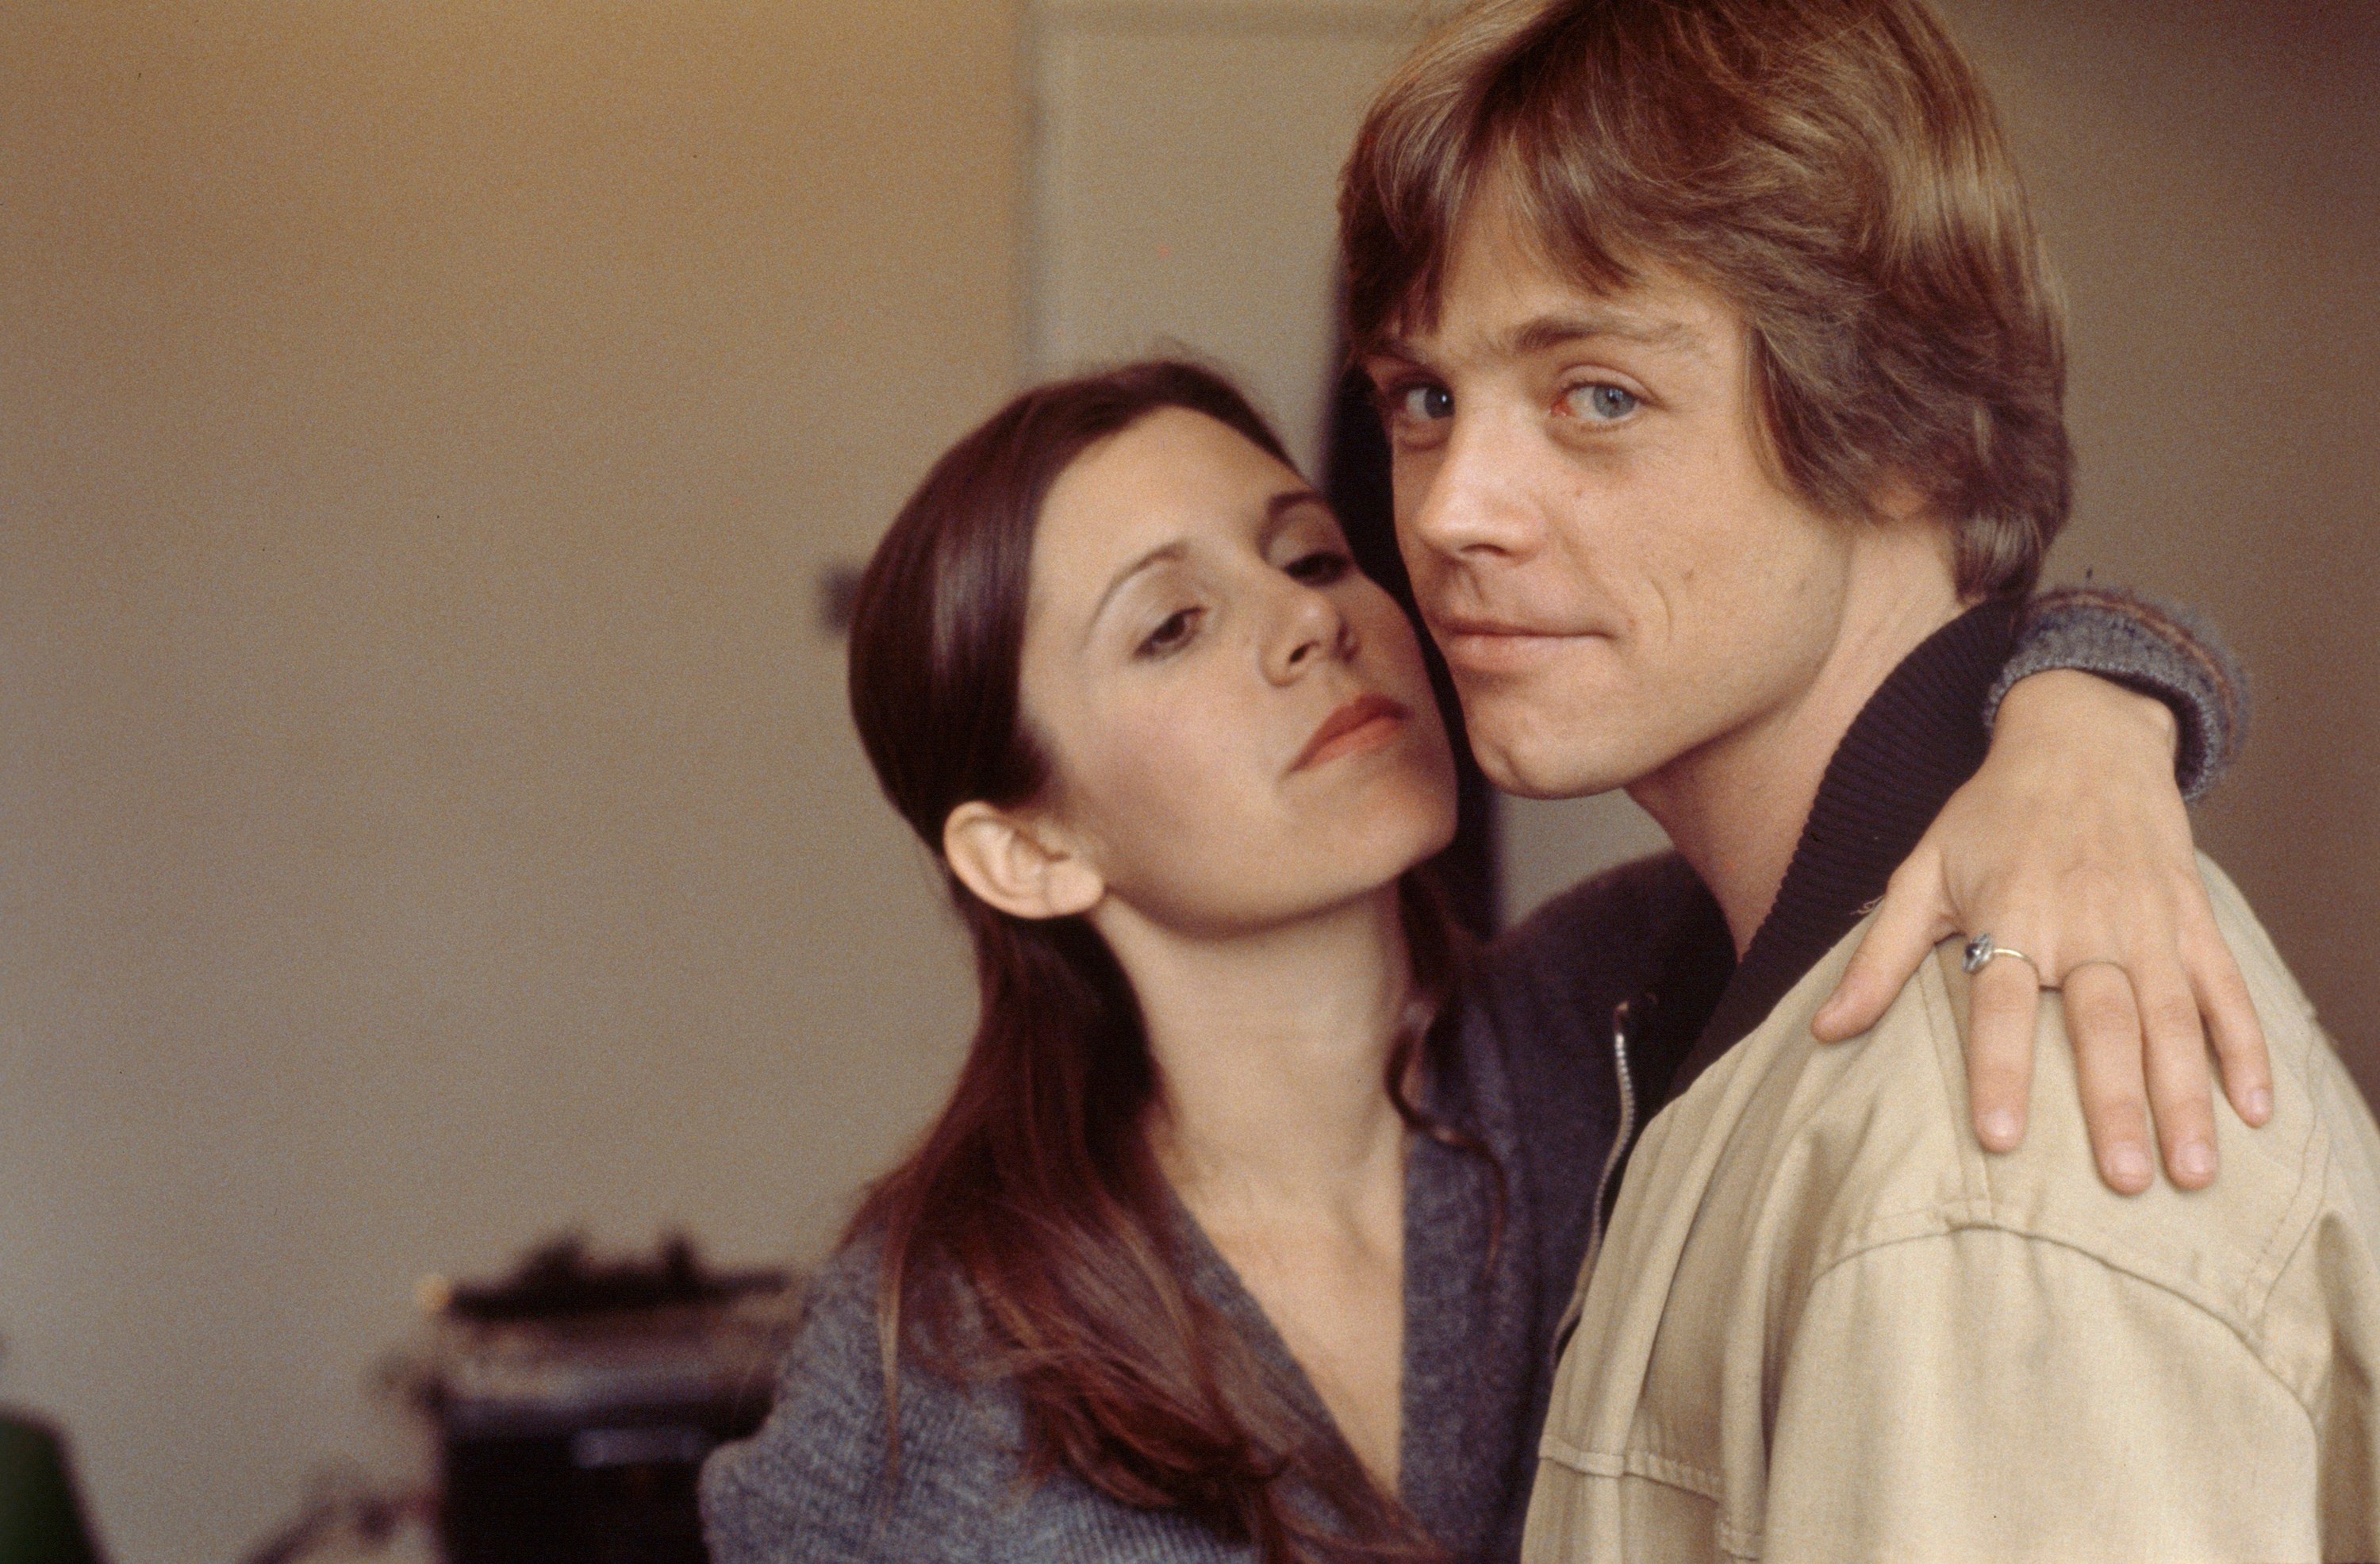 'Star Wars' Mark Hamill and Carrie Fisher